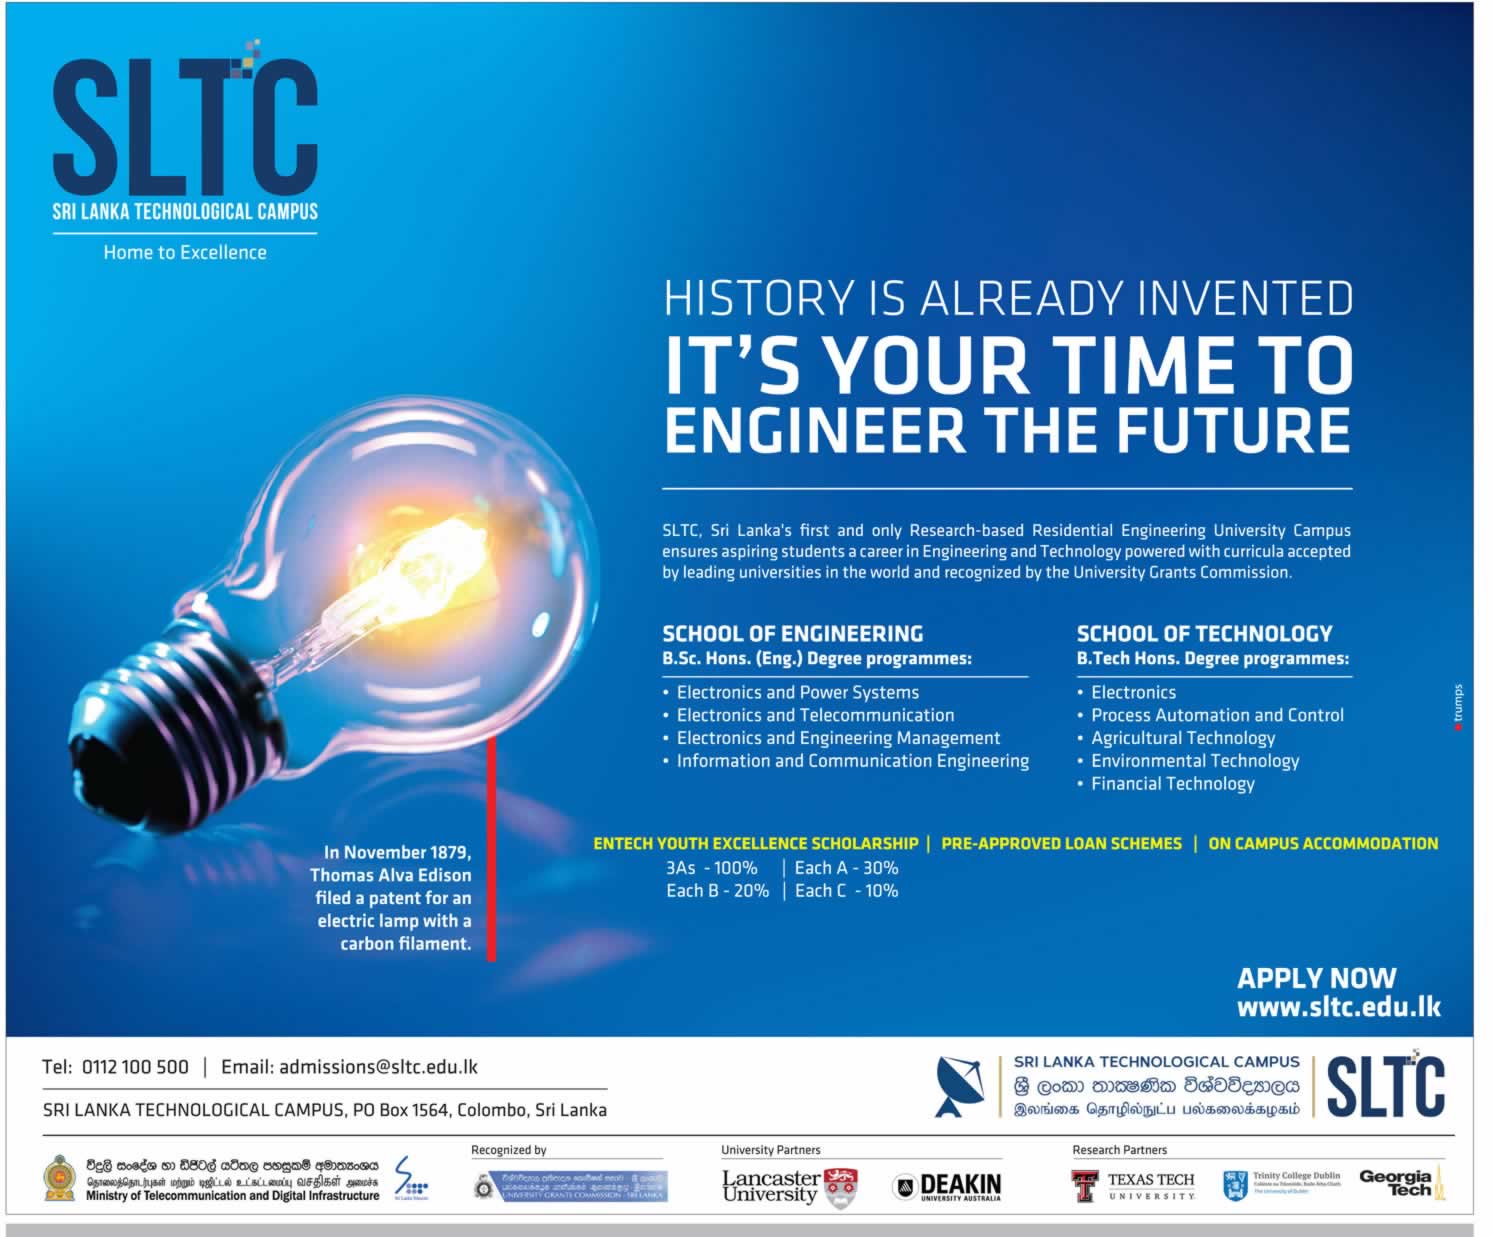 Sri Lanka Technological Campus Engineering and Technology Degree Programme